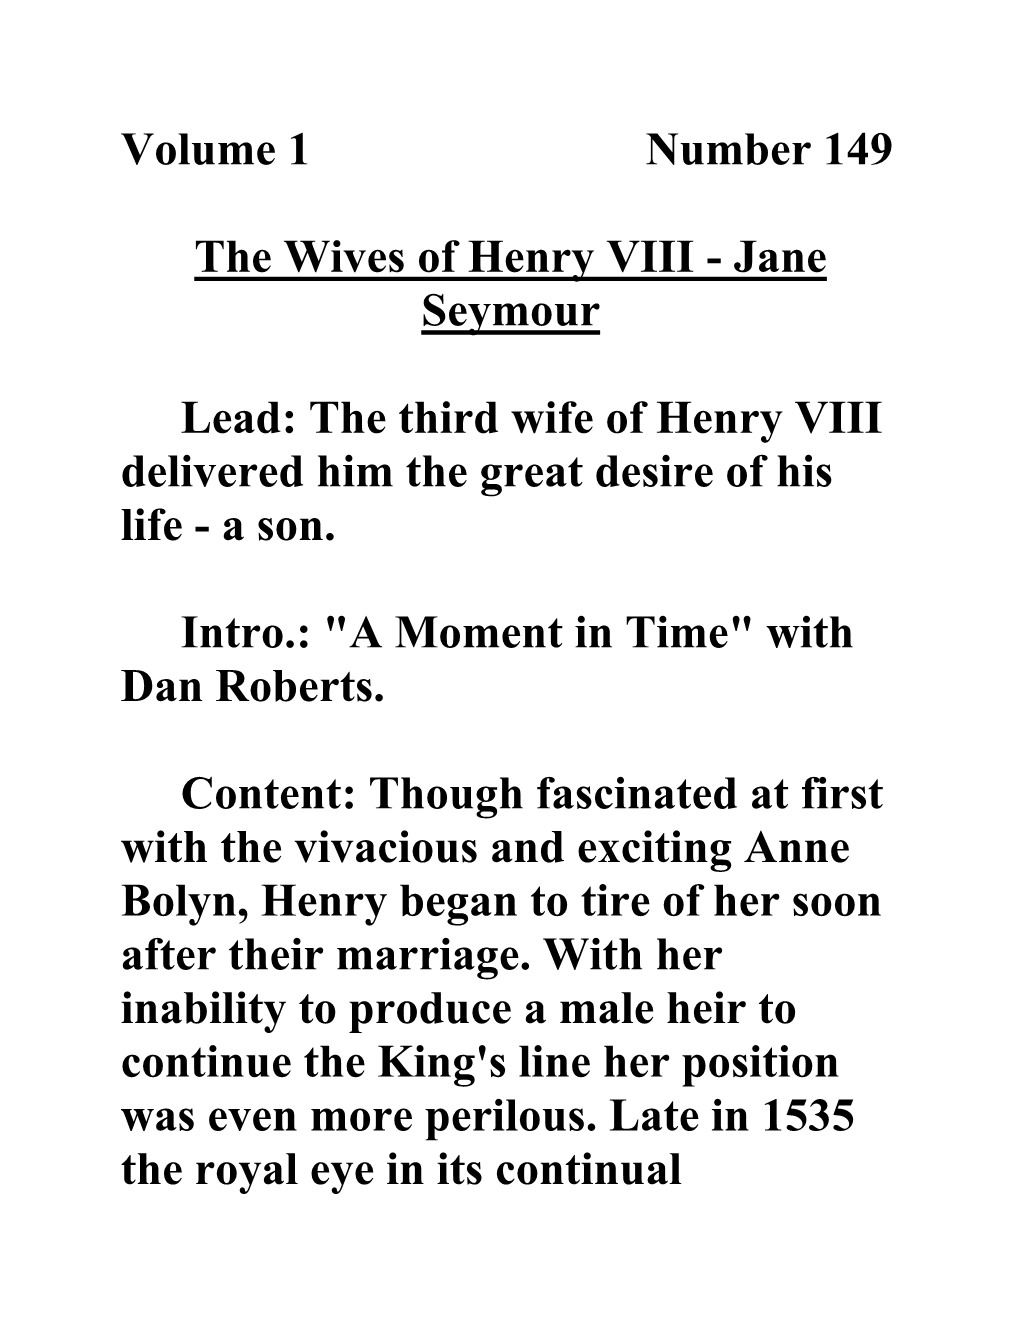 Volume 1 Number 149 the Wives of Henry VIII